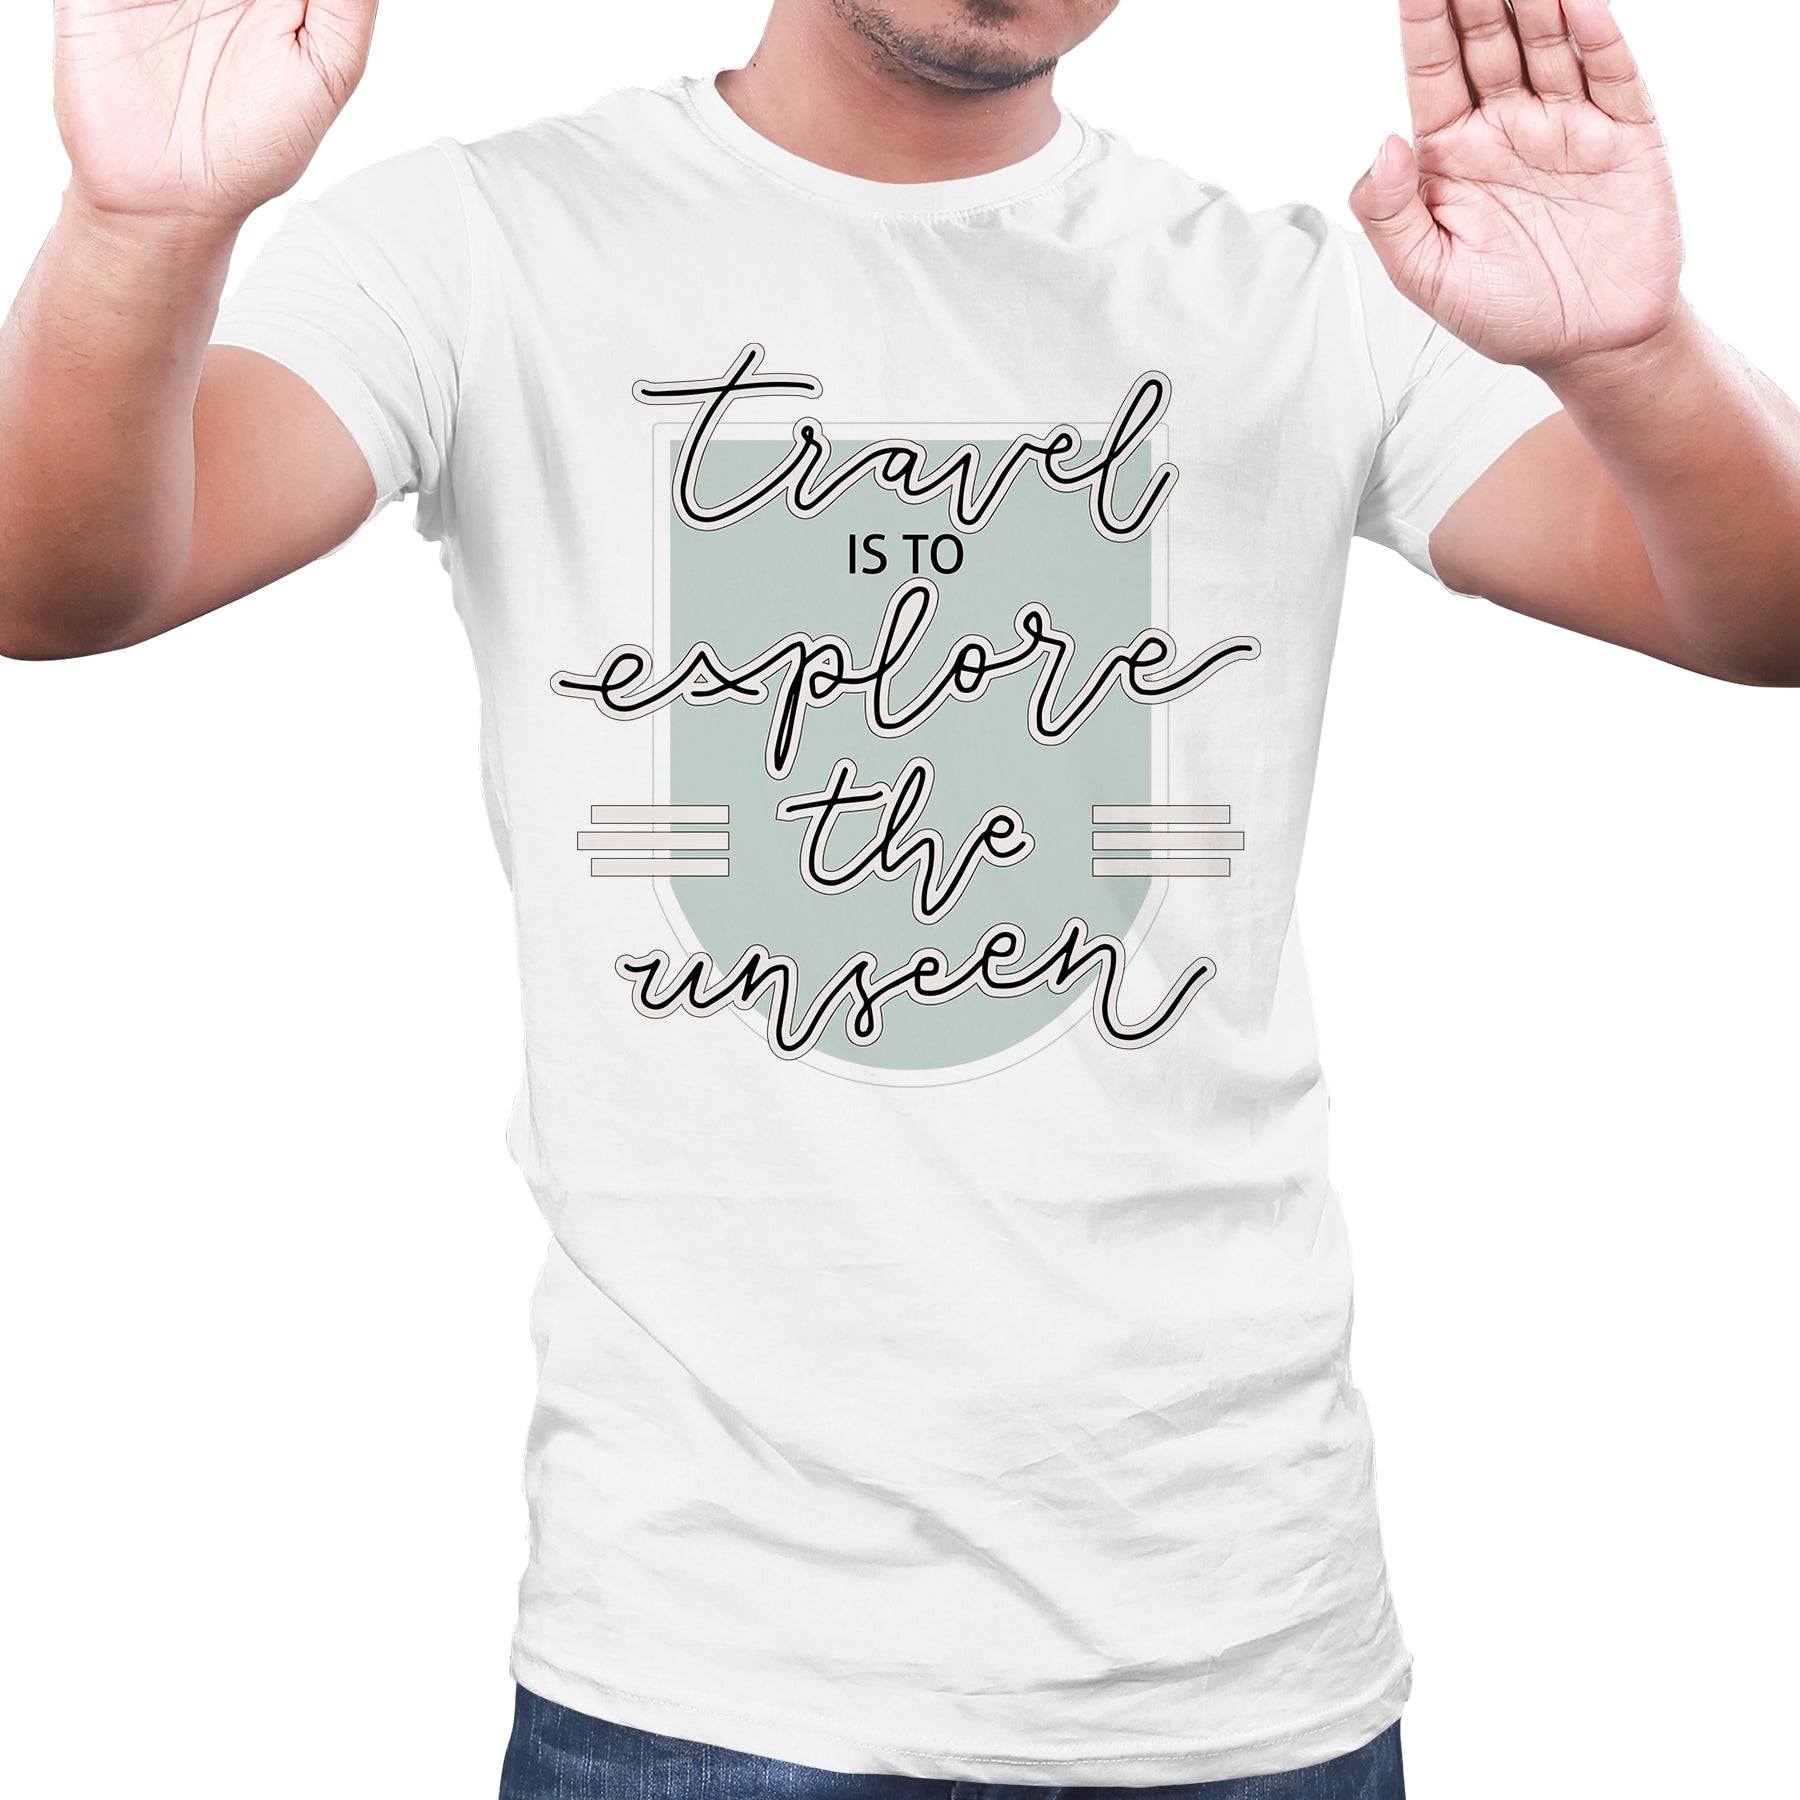 Travel the world & explore the unseen unisex t shirts - Black